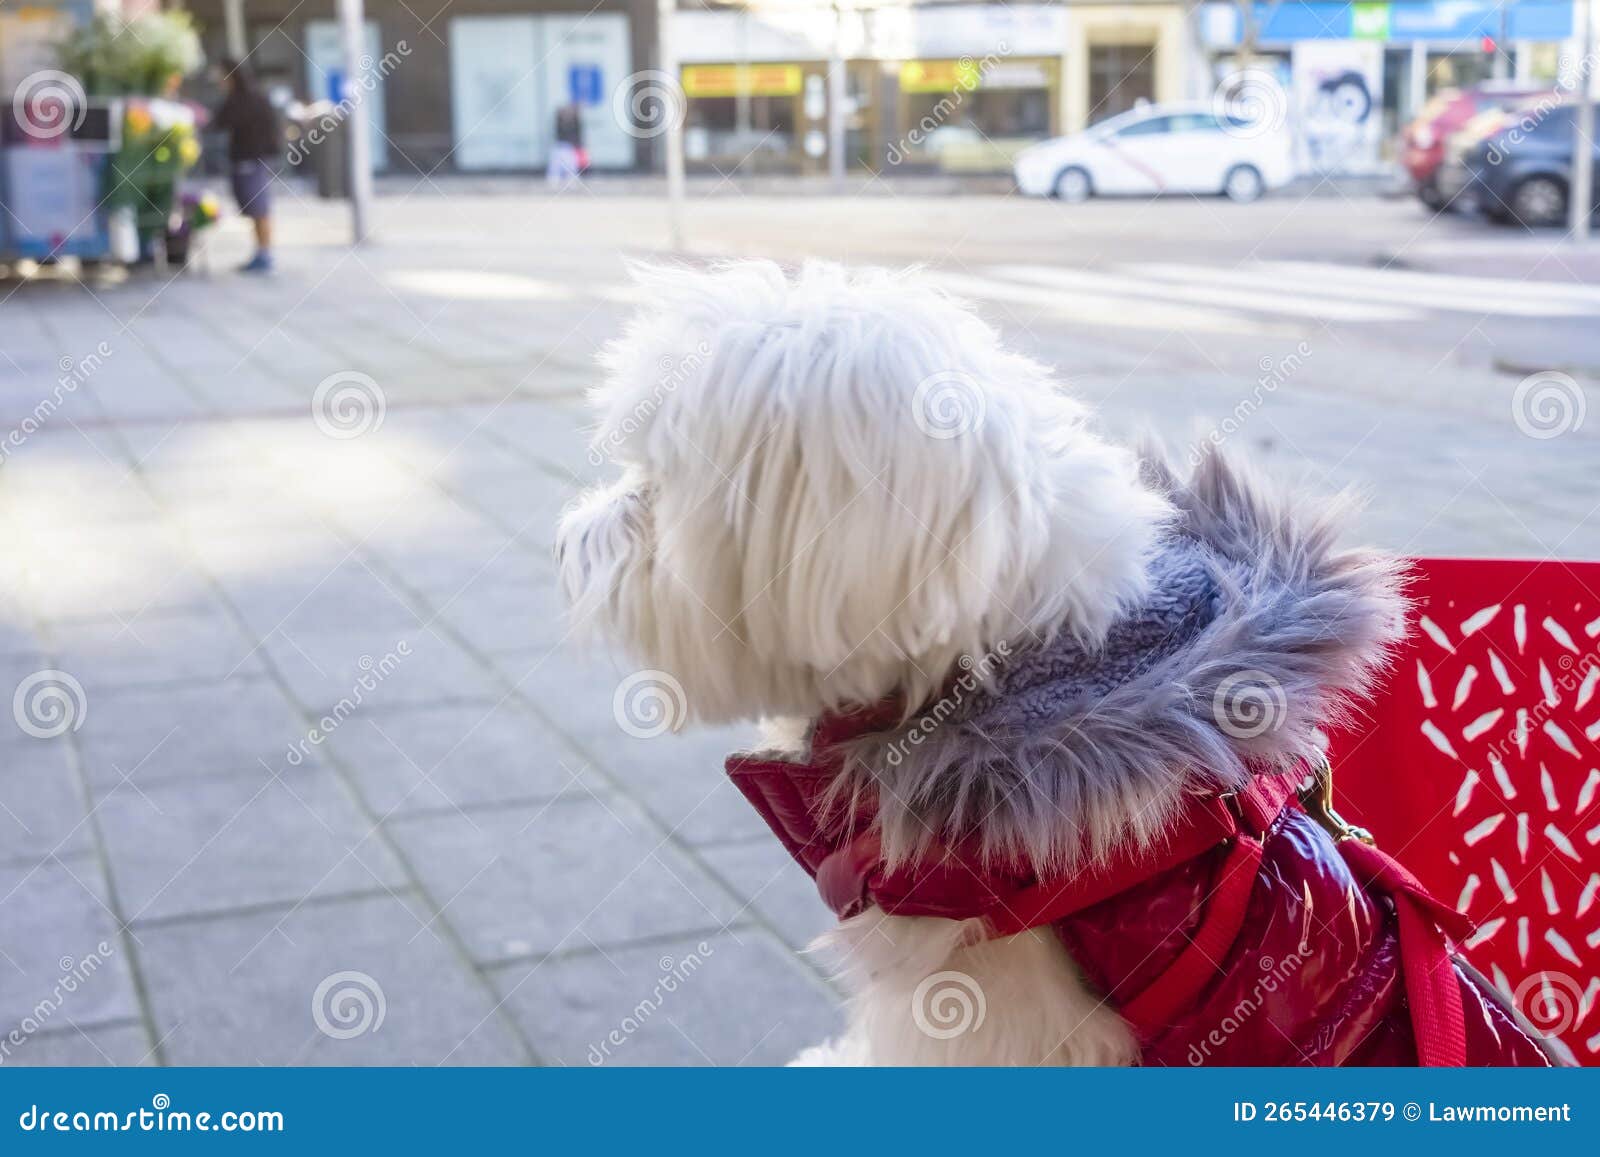 a bichon maltese dog looking at the street sitting on a chair at a terraza